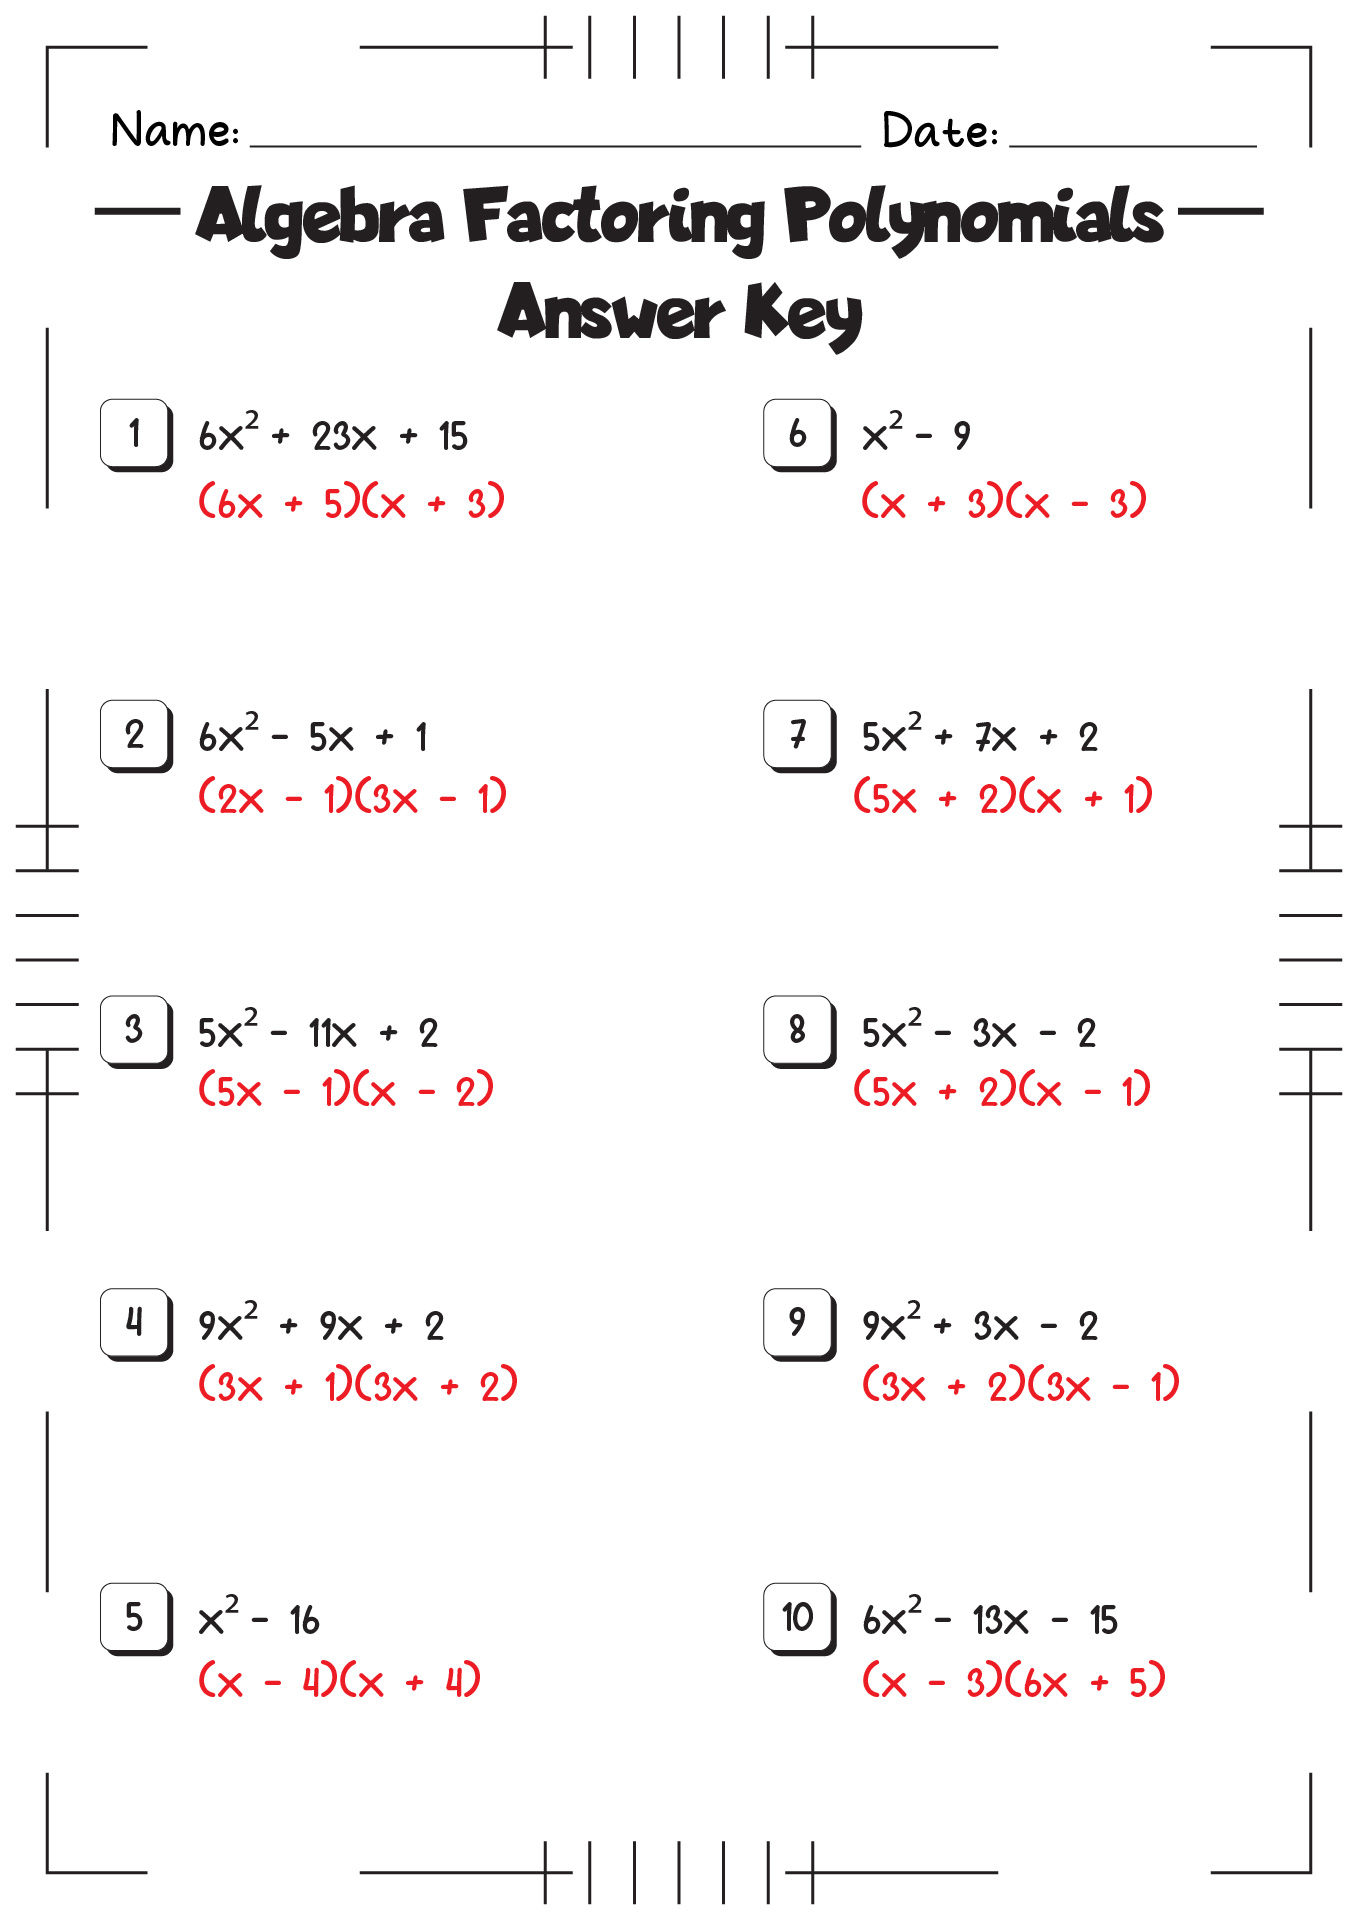 Algebra Factoring Polynomials Worksheets with Answers